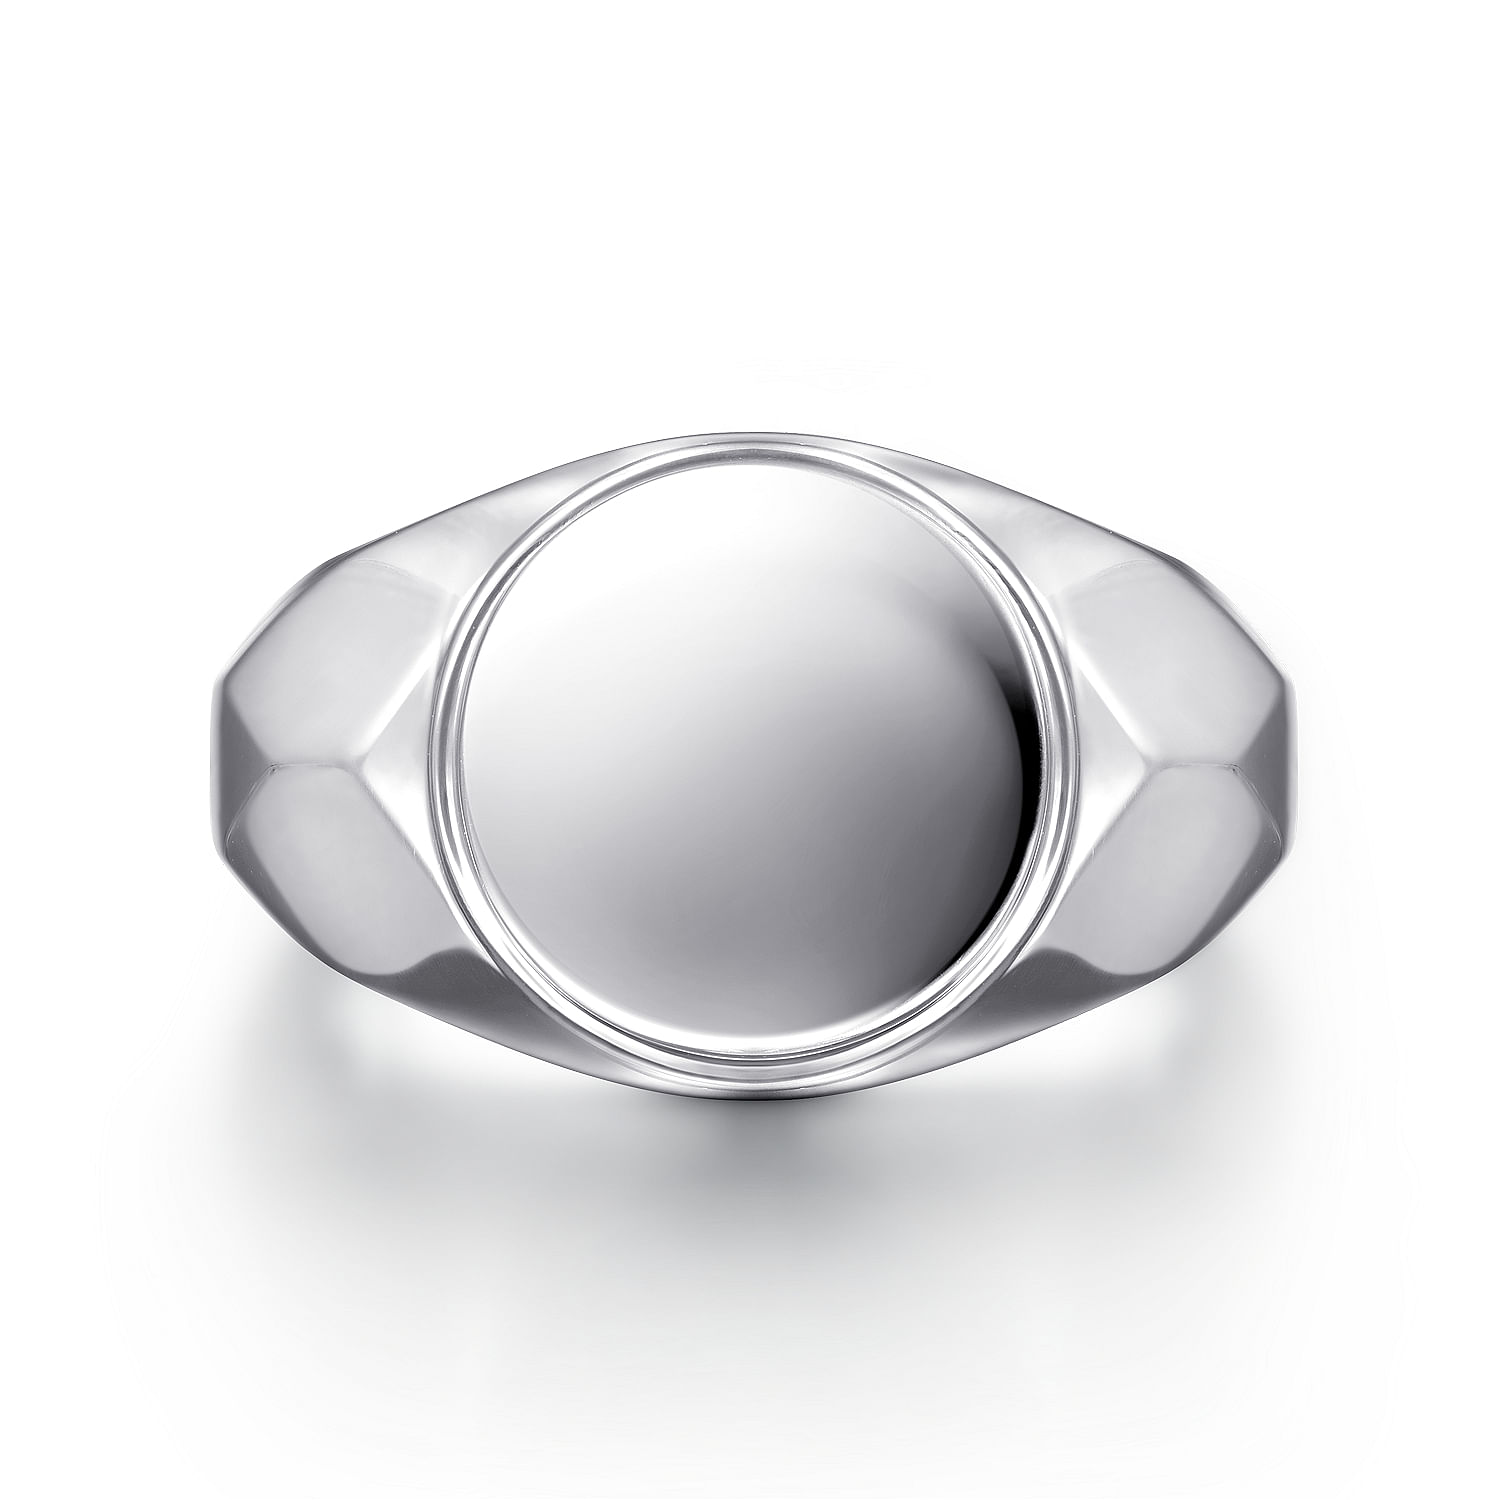 Wide 925 Sterling Silver Round Signet Ring in High Polished Finish